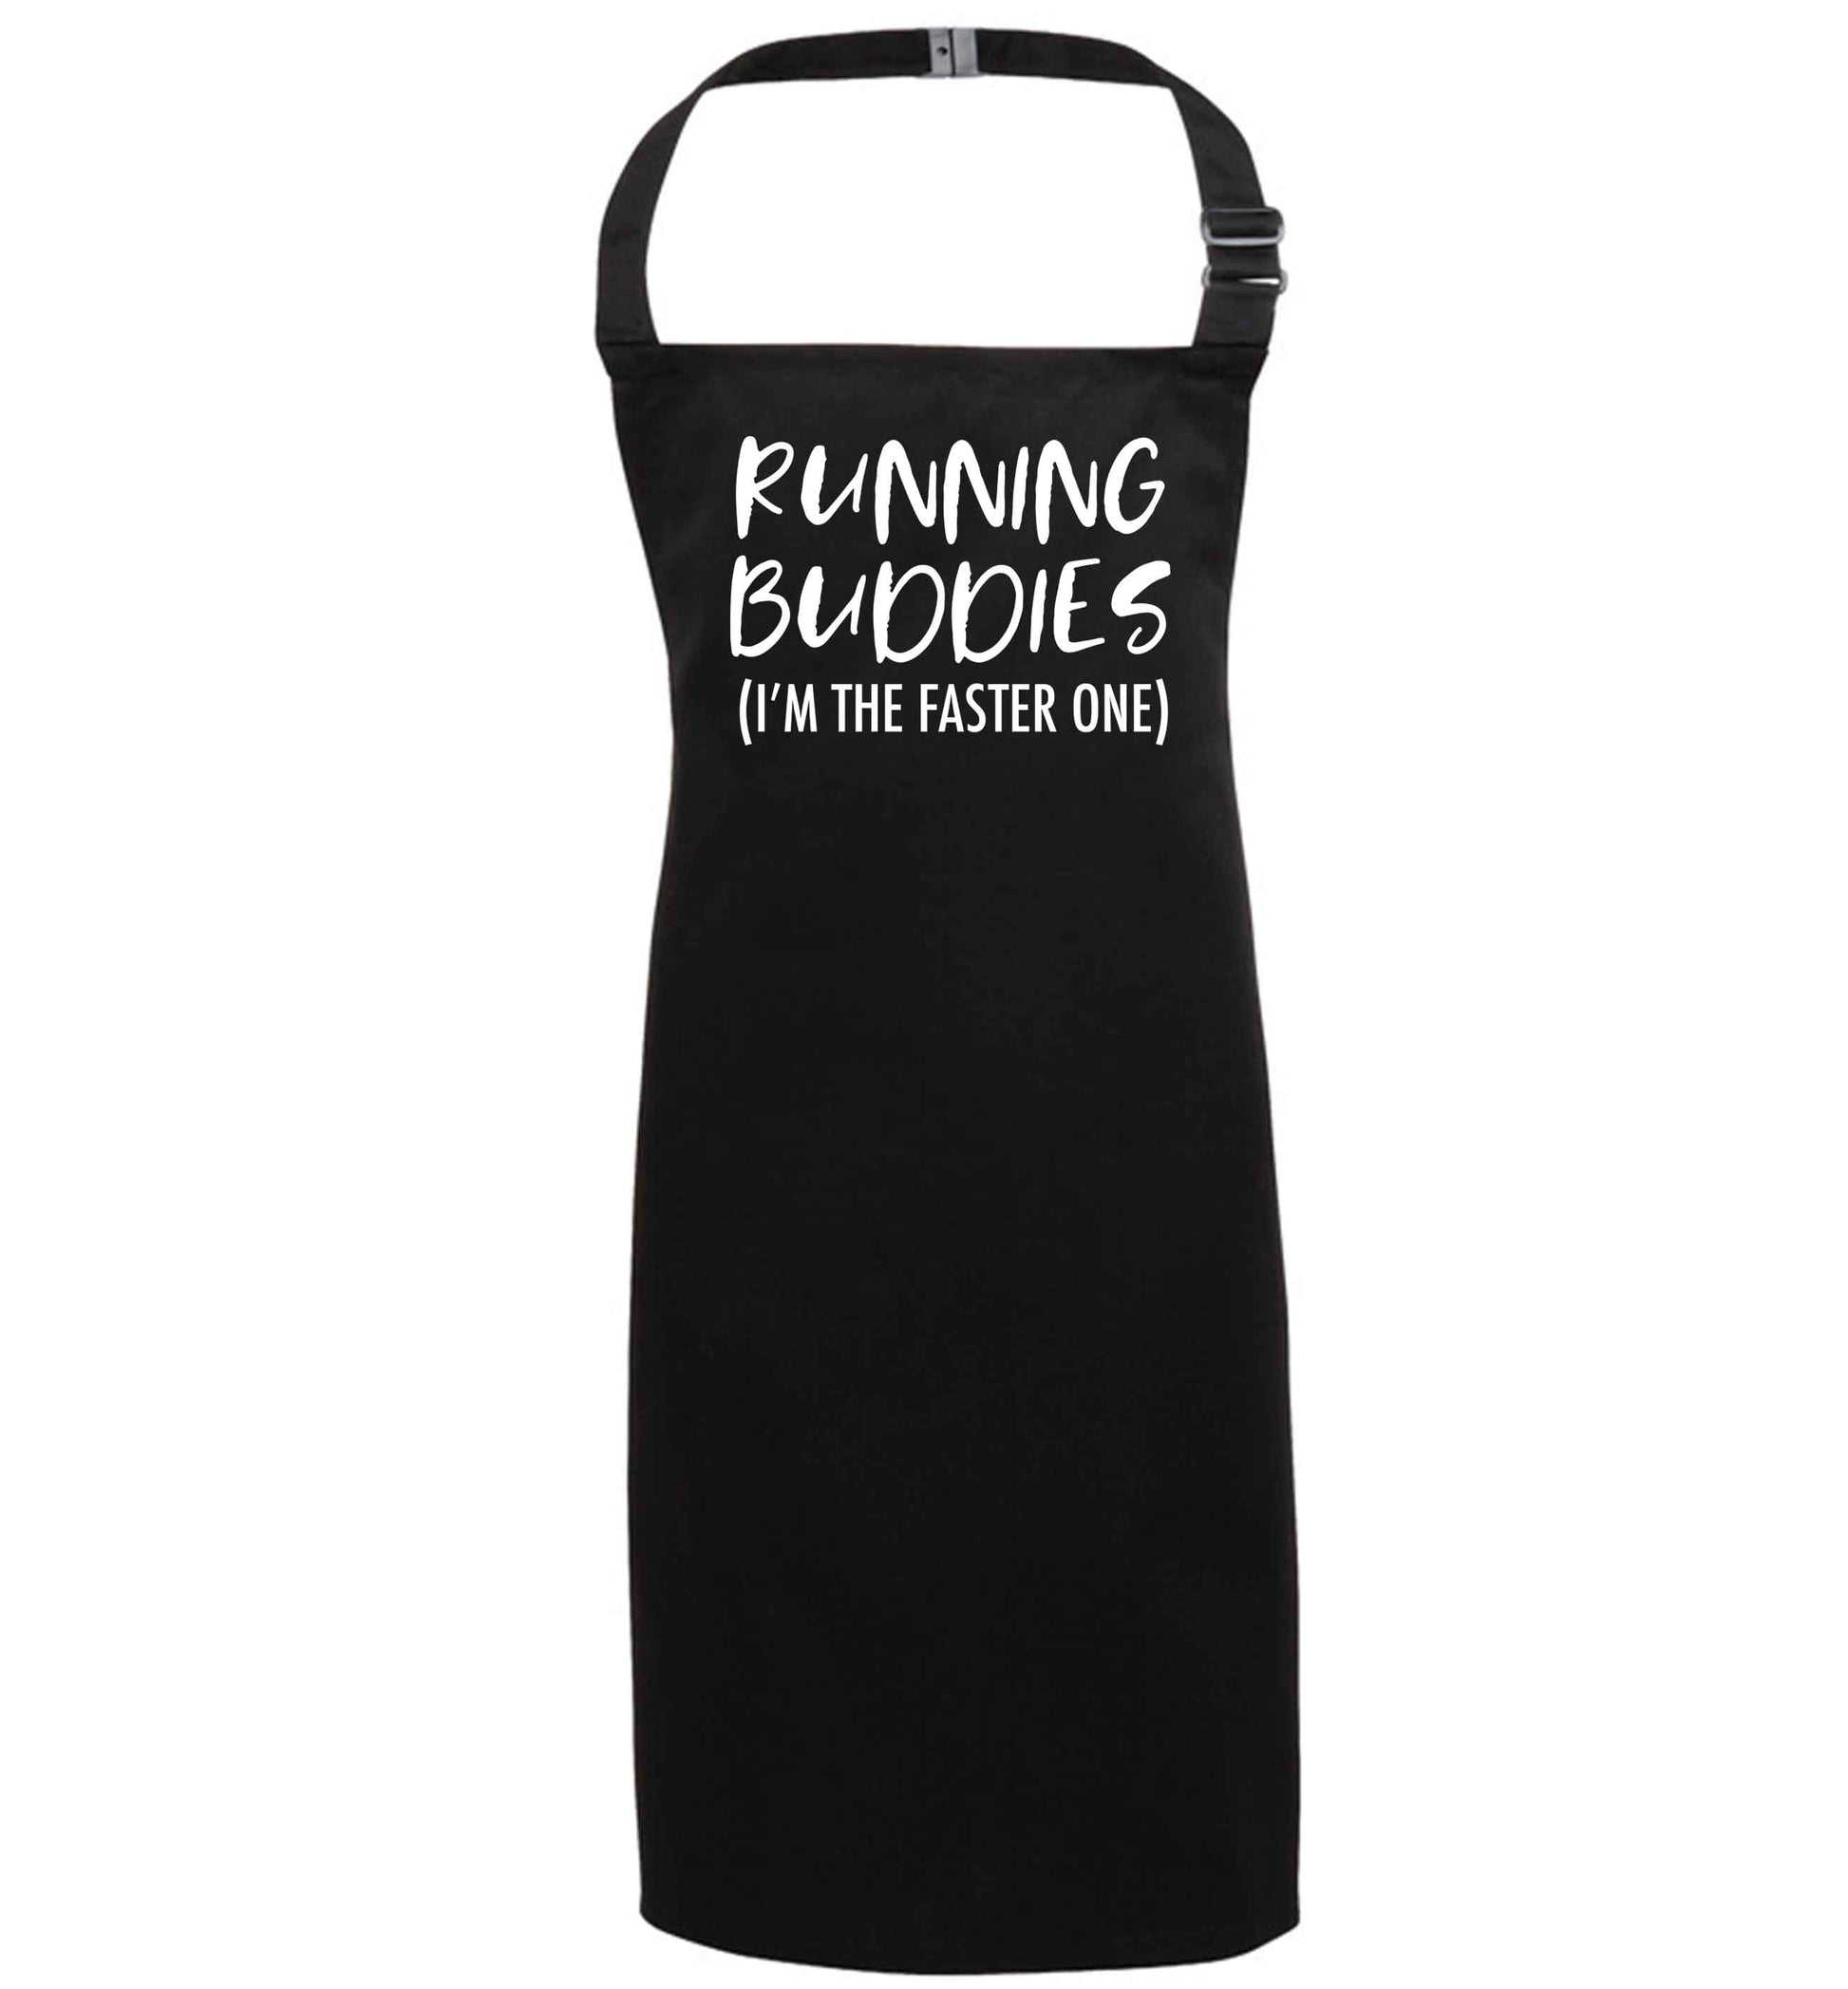 Running buddies (I'm the faster one) black apron 7-10 years